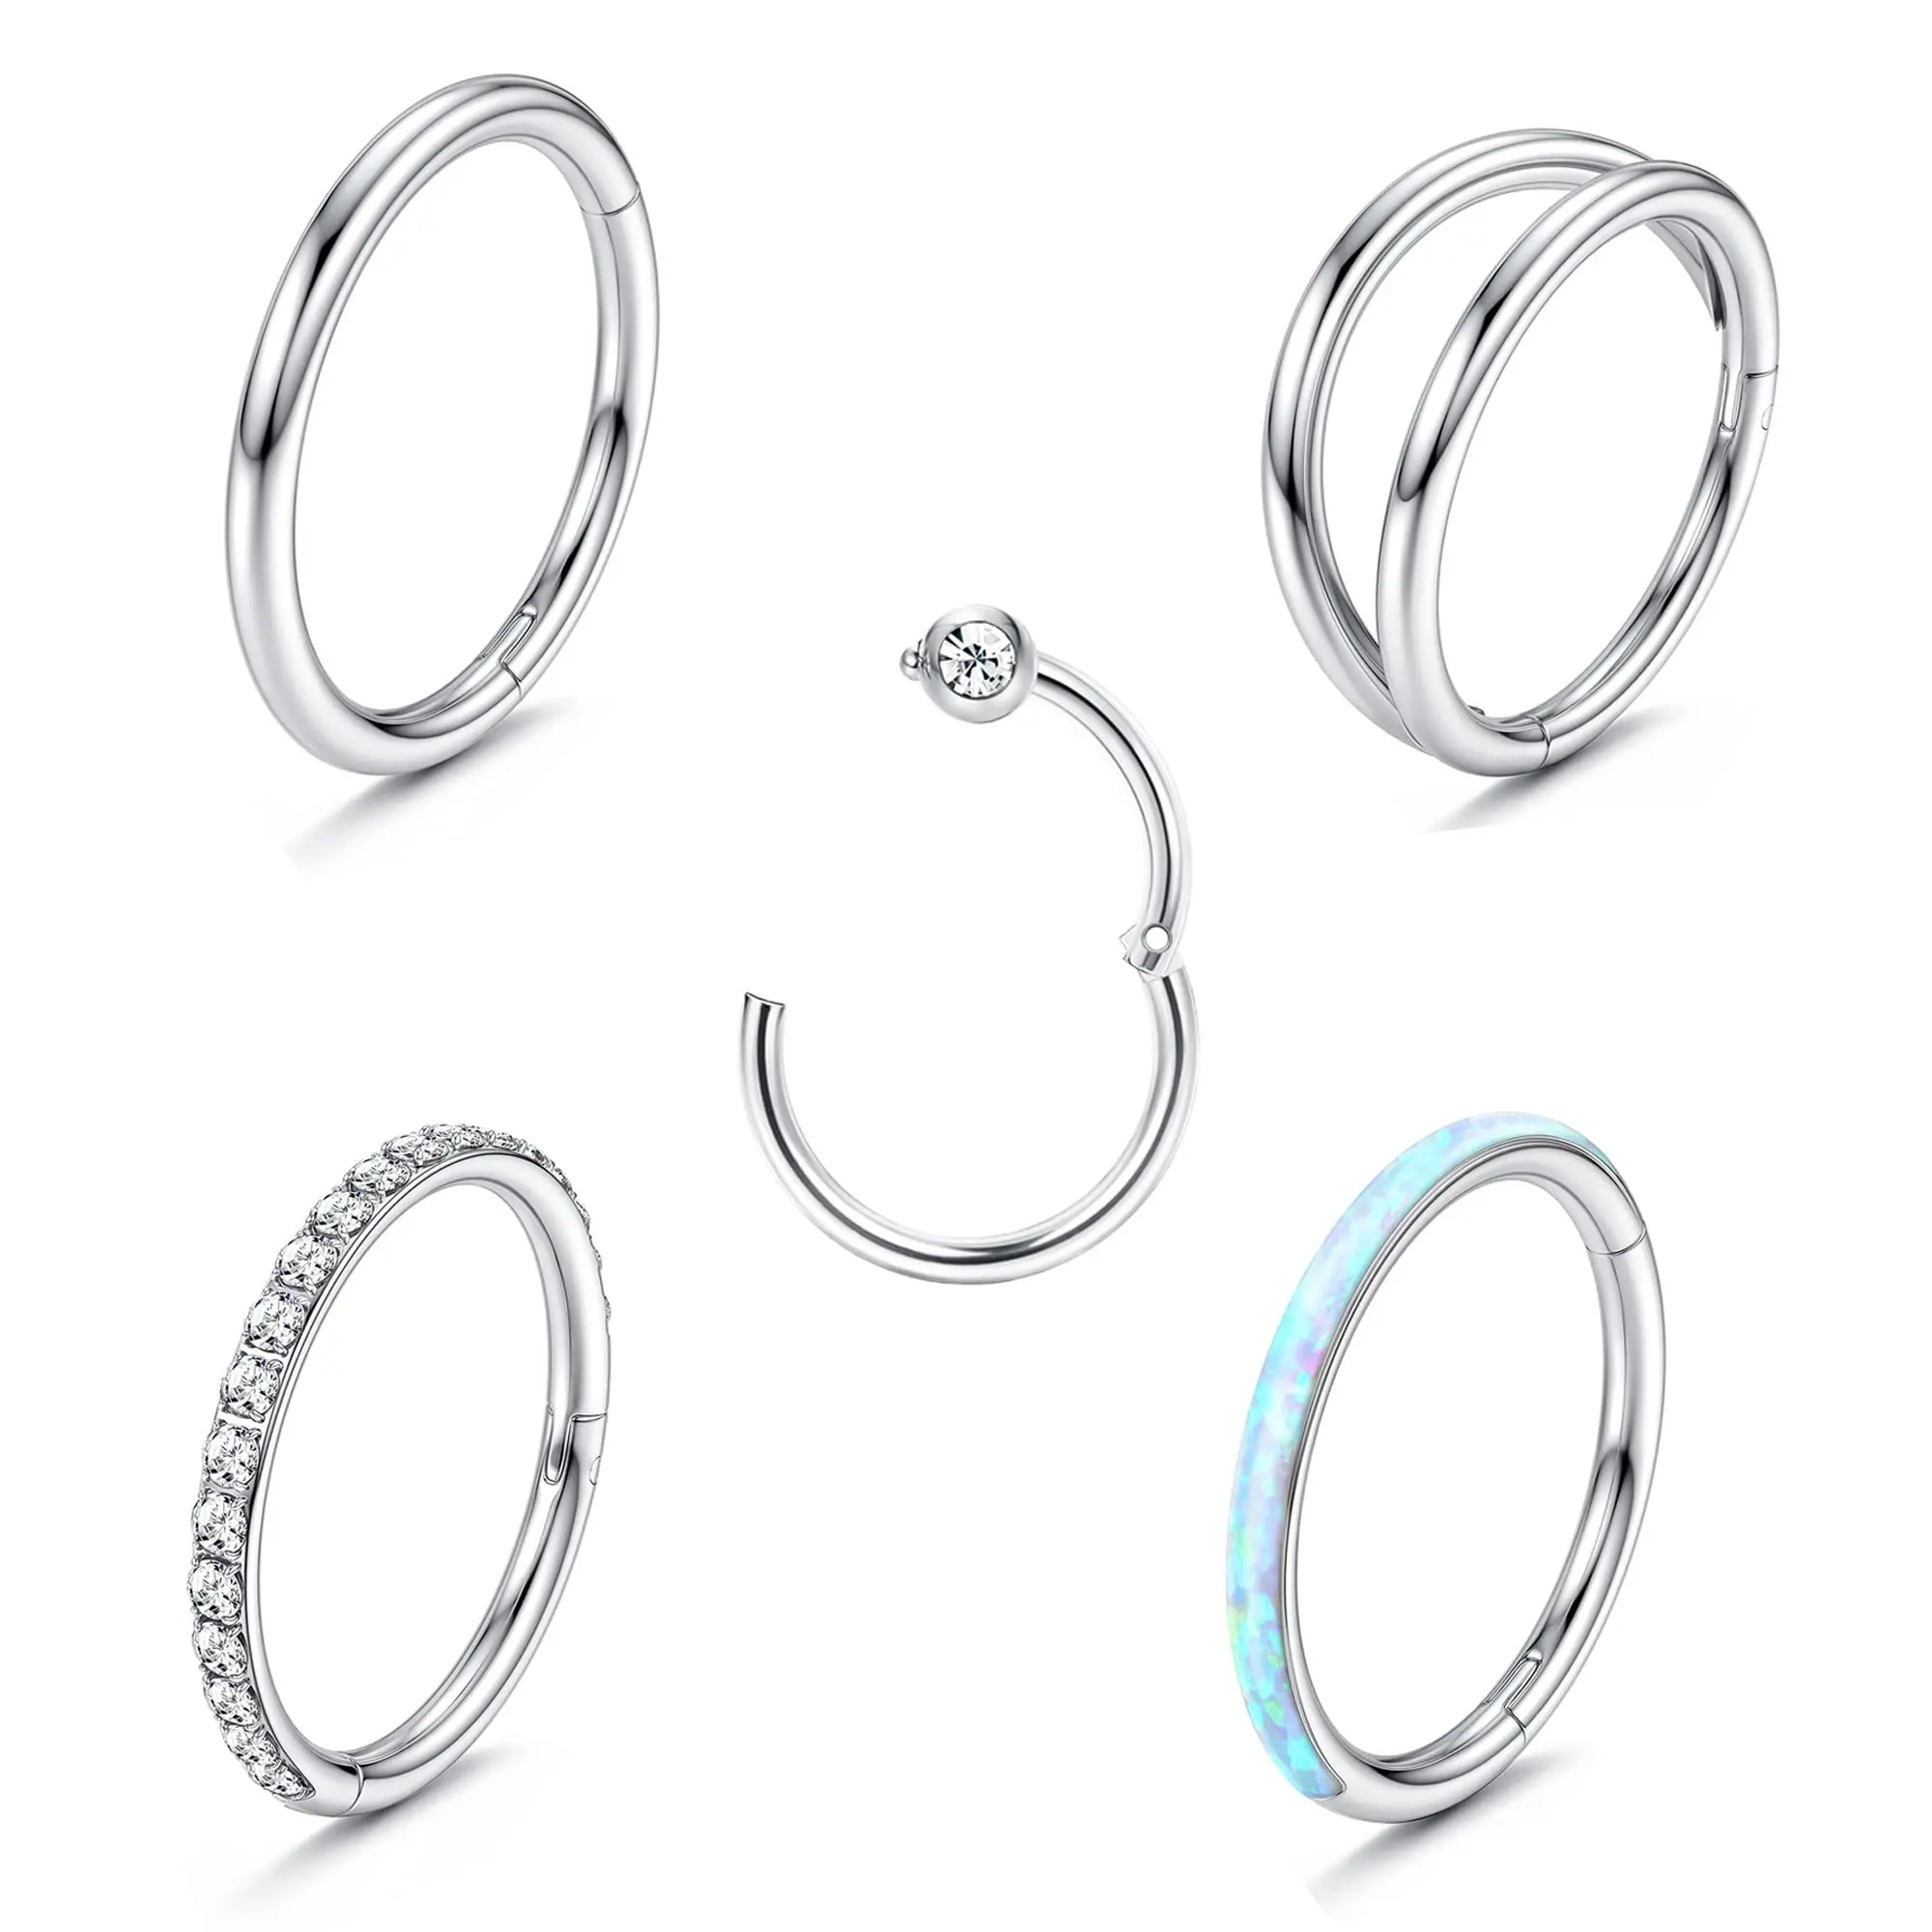 

Drperfect Surgical Steel Nose Rings Hoop for Women CZ Opal Septum Clicker Lip Rings Helix Cartilage Earring Daith Body Piercing